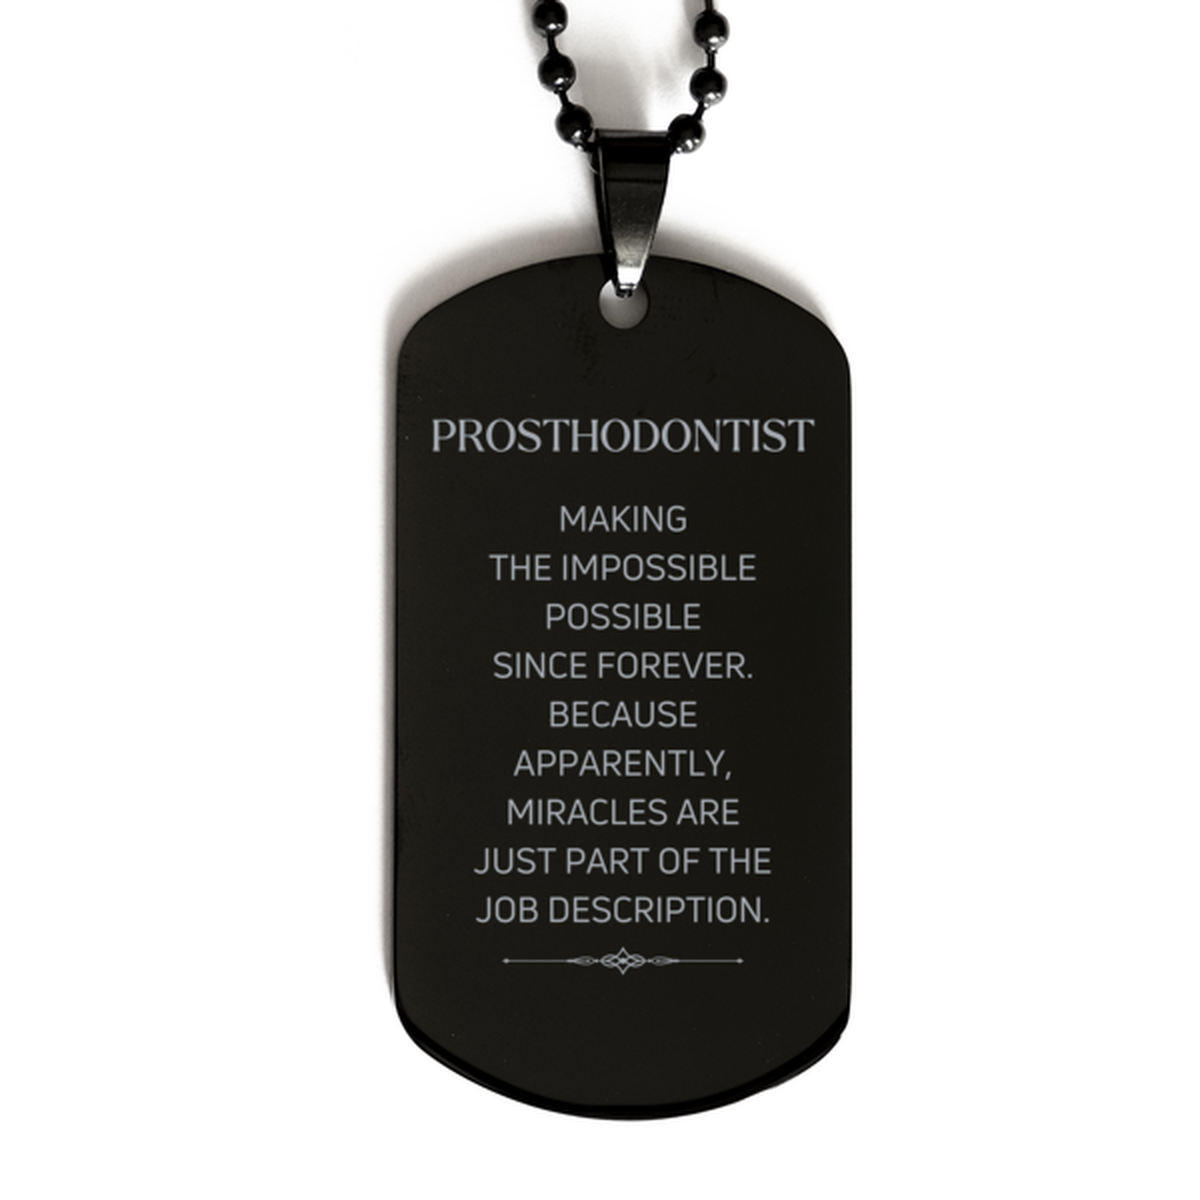 Funny Prosthodontist Gifts, Miracles are just part of the job description, Inspirational Birthday Black Dog Tag For Prosthodontist, Men, Women, Coworkers, Friends, Boss